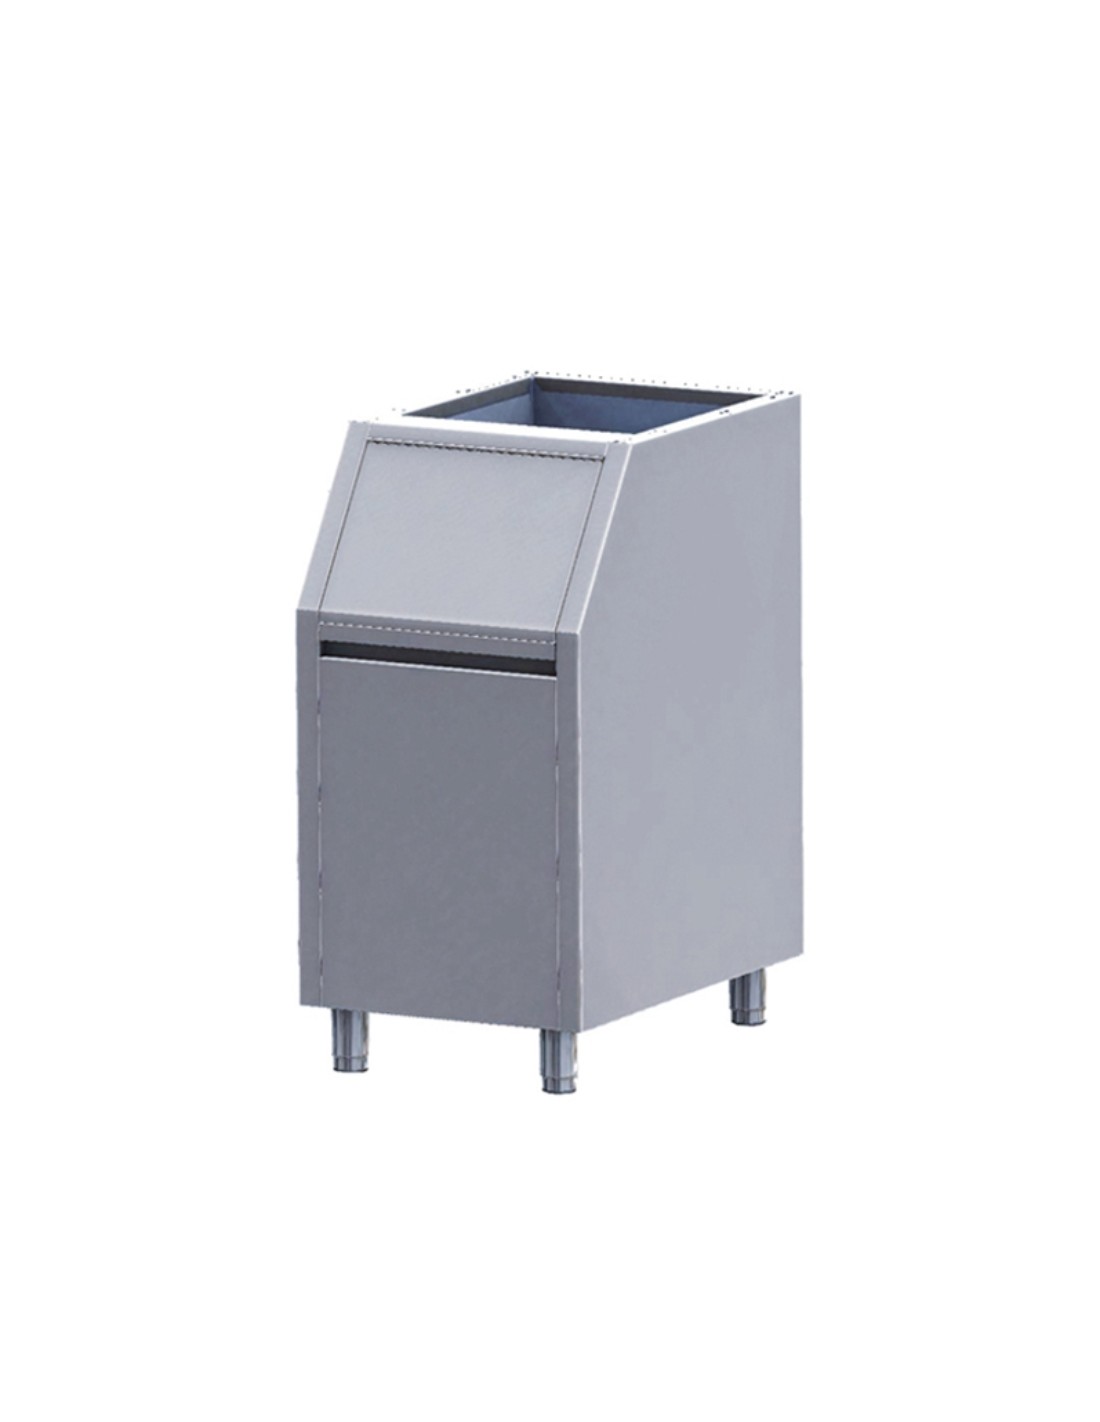 Ice container - Model BINT250 - Container capacity kg 100 - Dimensions cm 56 x 81.5 x 100 h